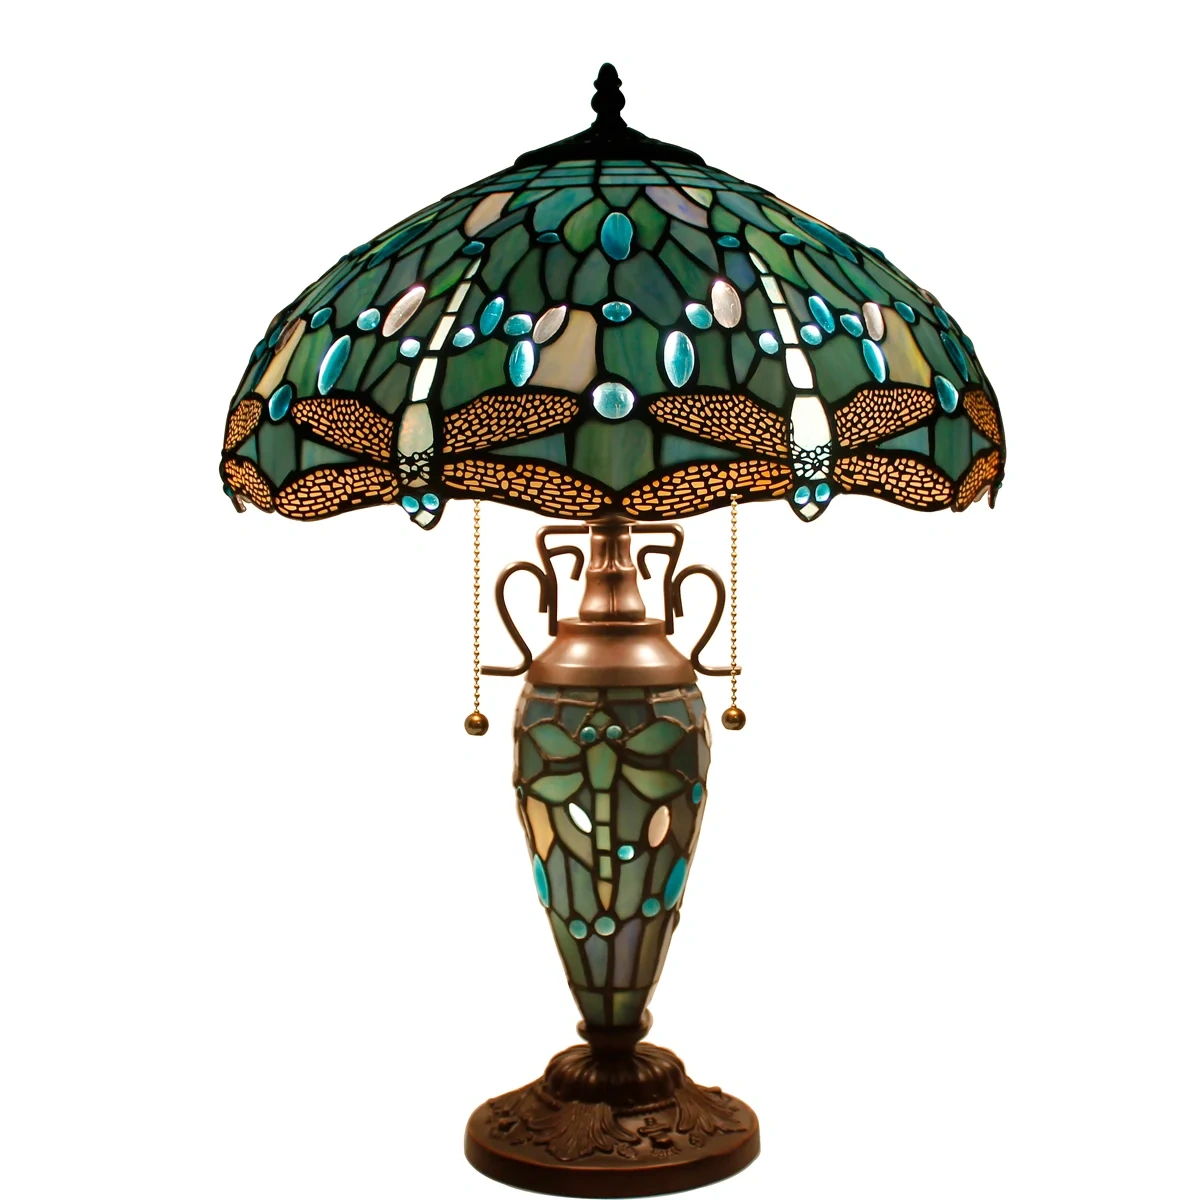 Tiffany Table Lamp With Nightlight Rustic Large 24